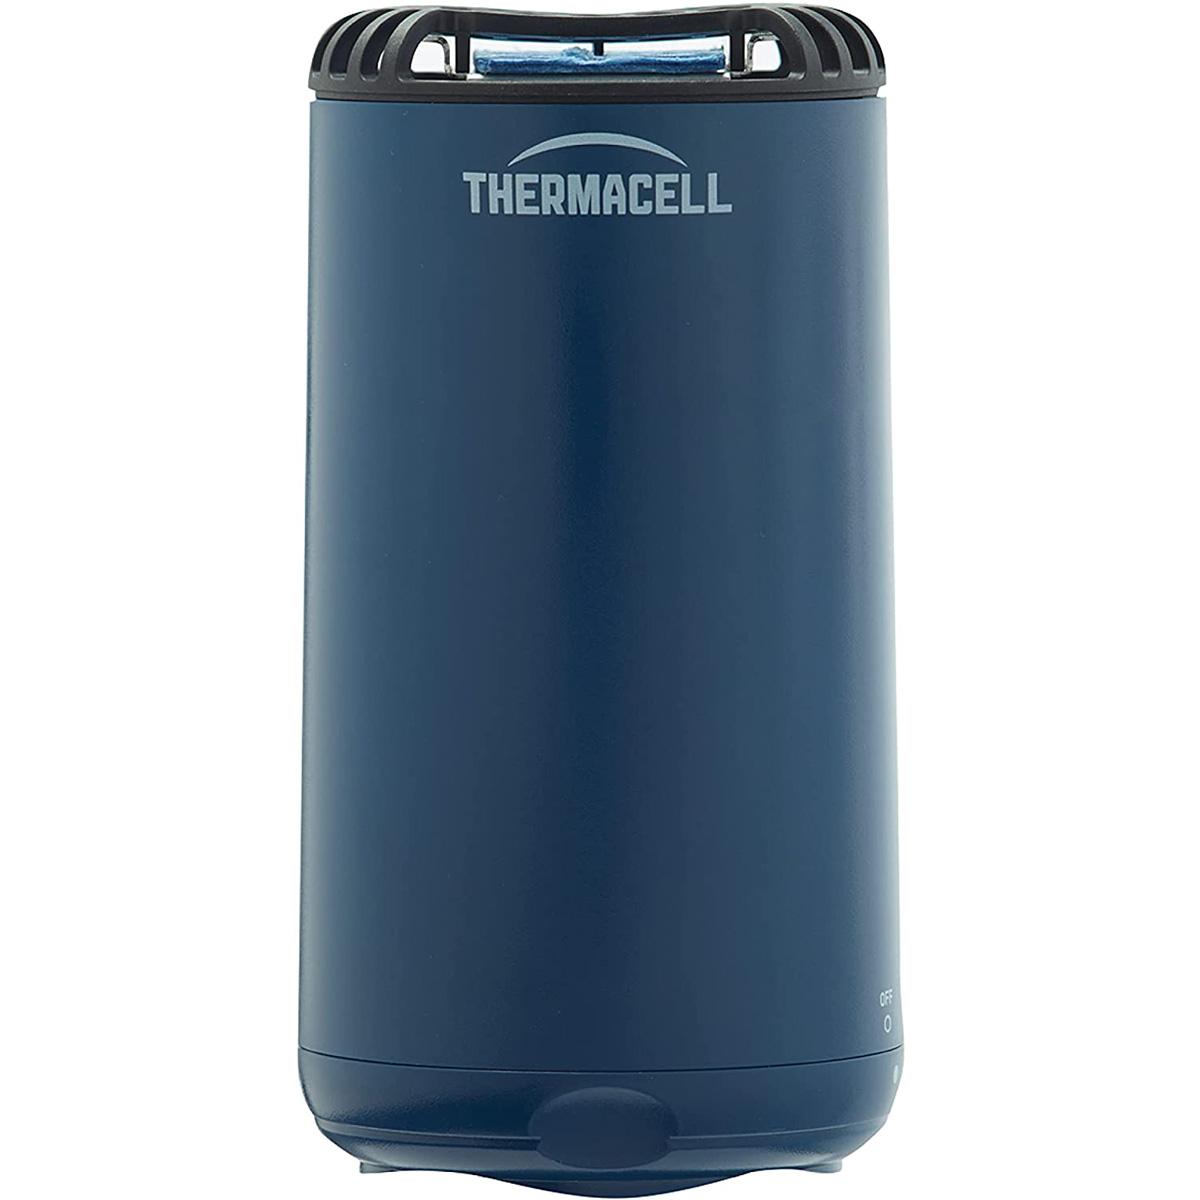 Thermacell Patio Shield Mosquito Repeller for $14.99